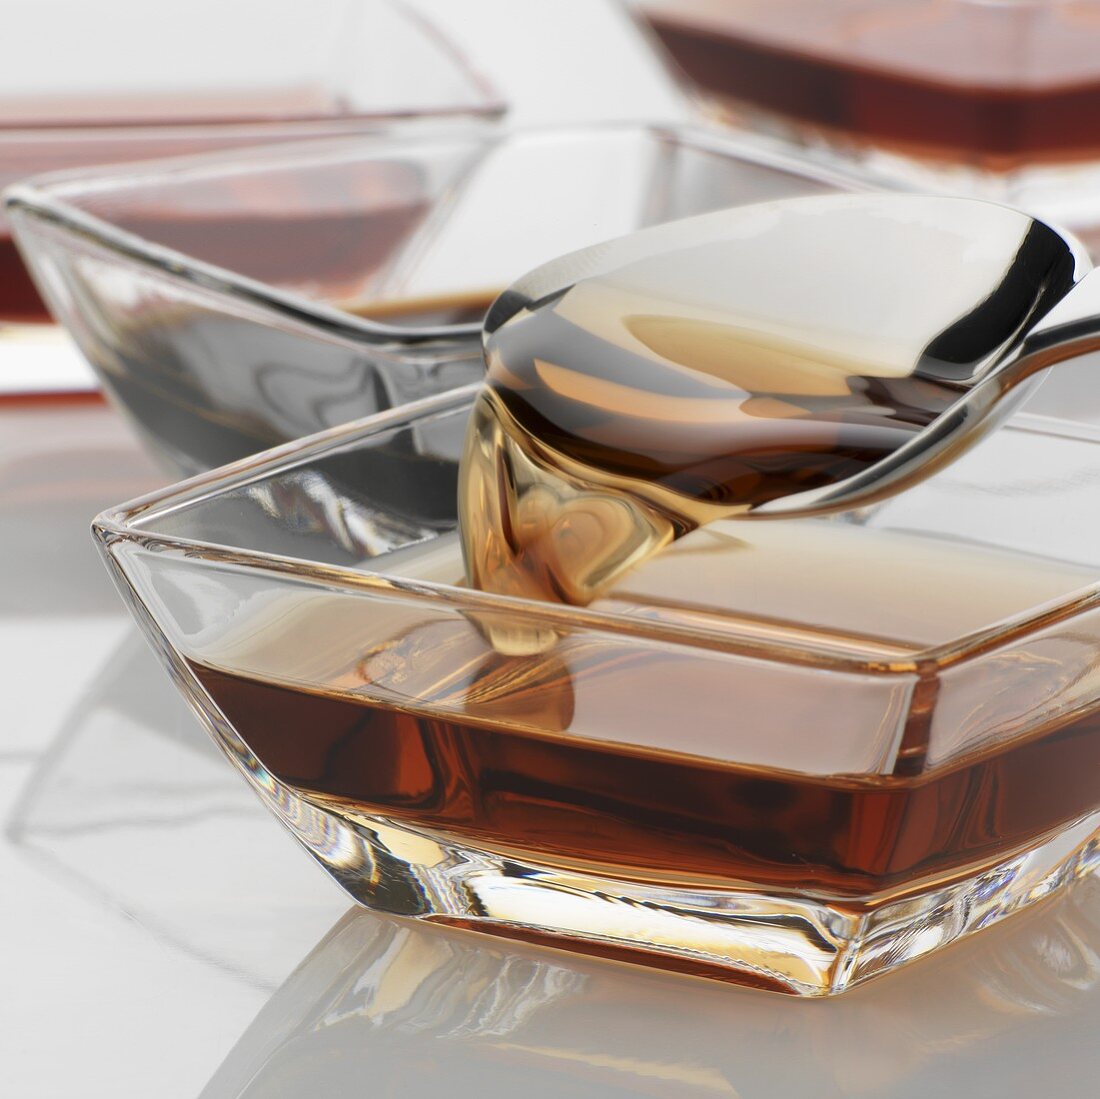 Various types of vinegar in glass dishes with spoon